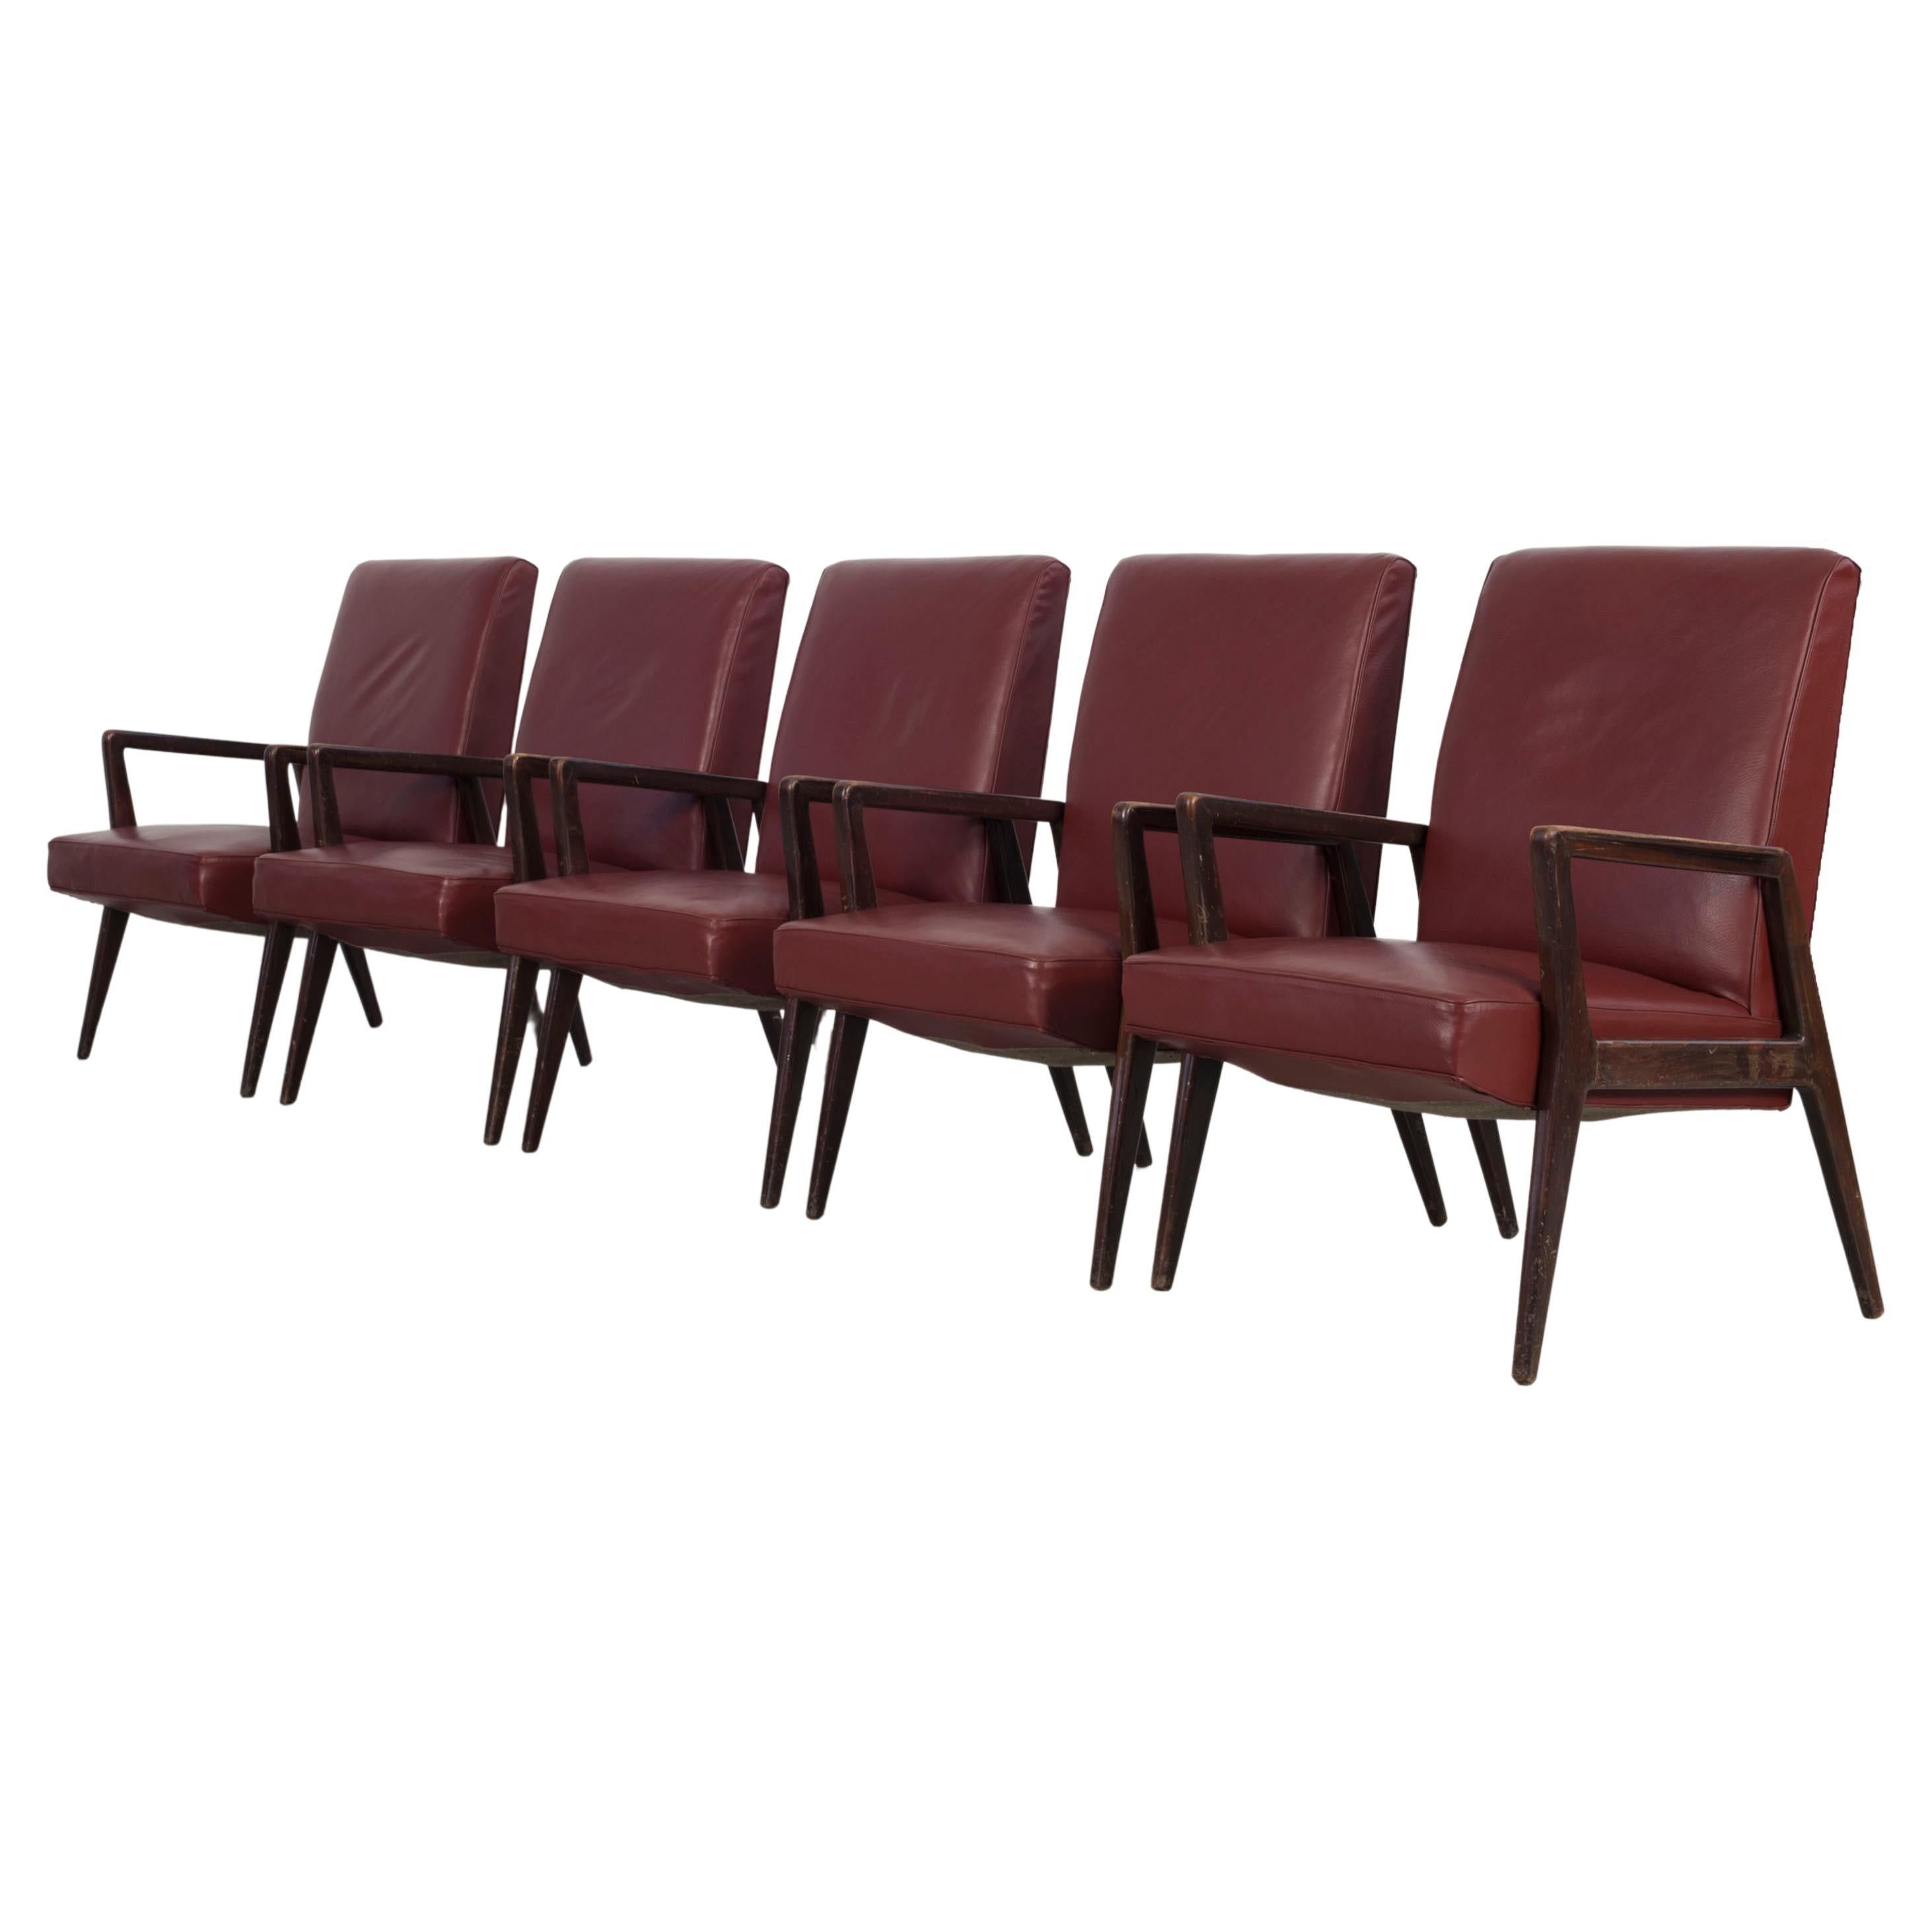 Set of 5 Dark Red Leatherette Armchairs, Italy 1960s